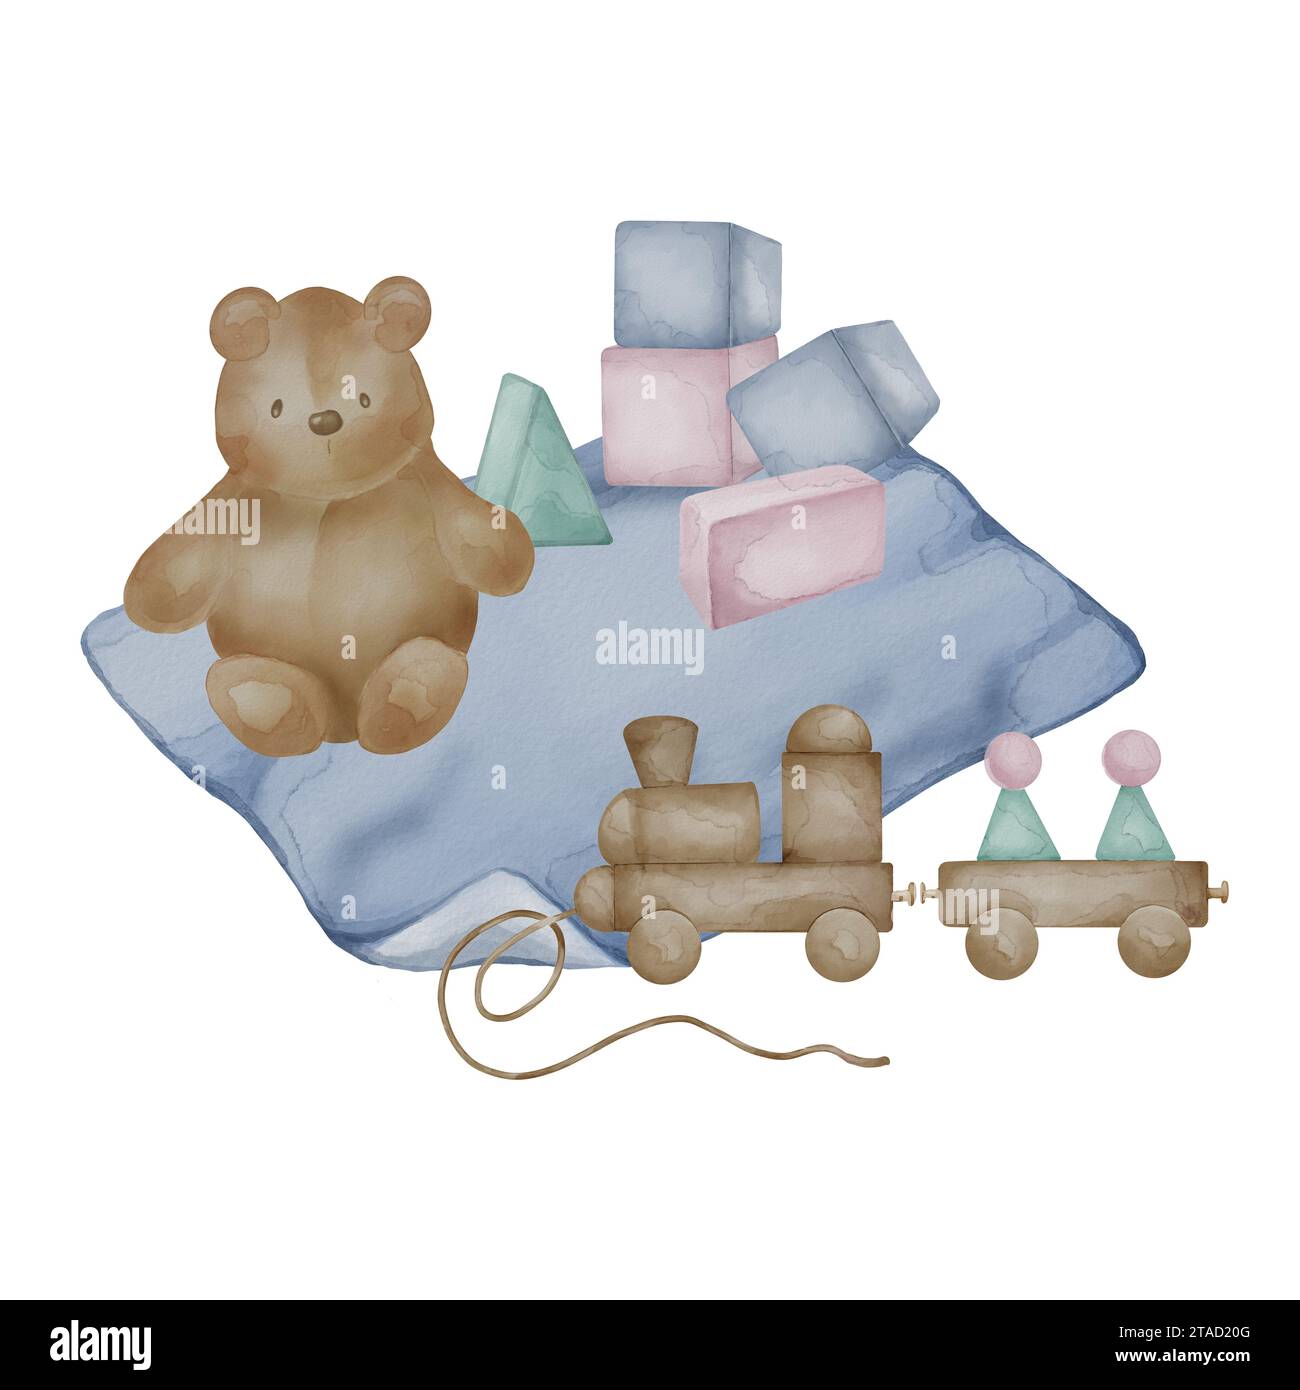 Illustration with teddy bear on baby blanket neutral colors isolated on white background. Hand drawn plush bear in pastel shades. Painted baby wooden Stock Photo